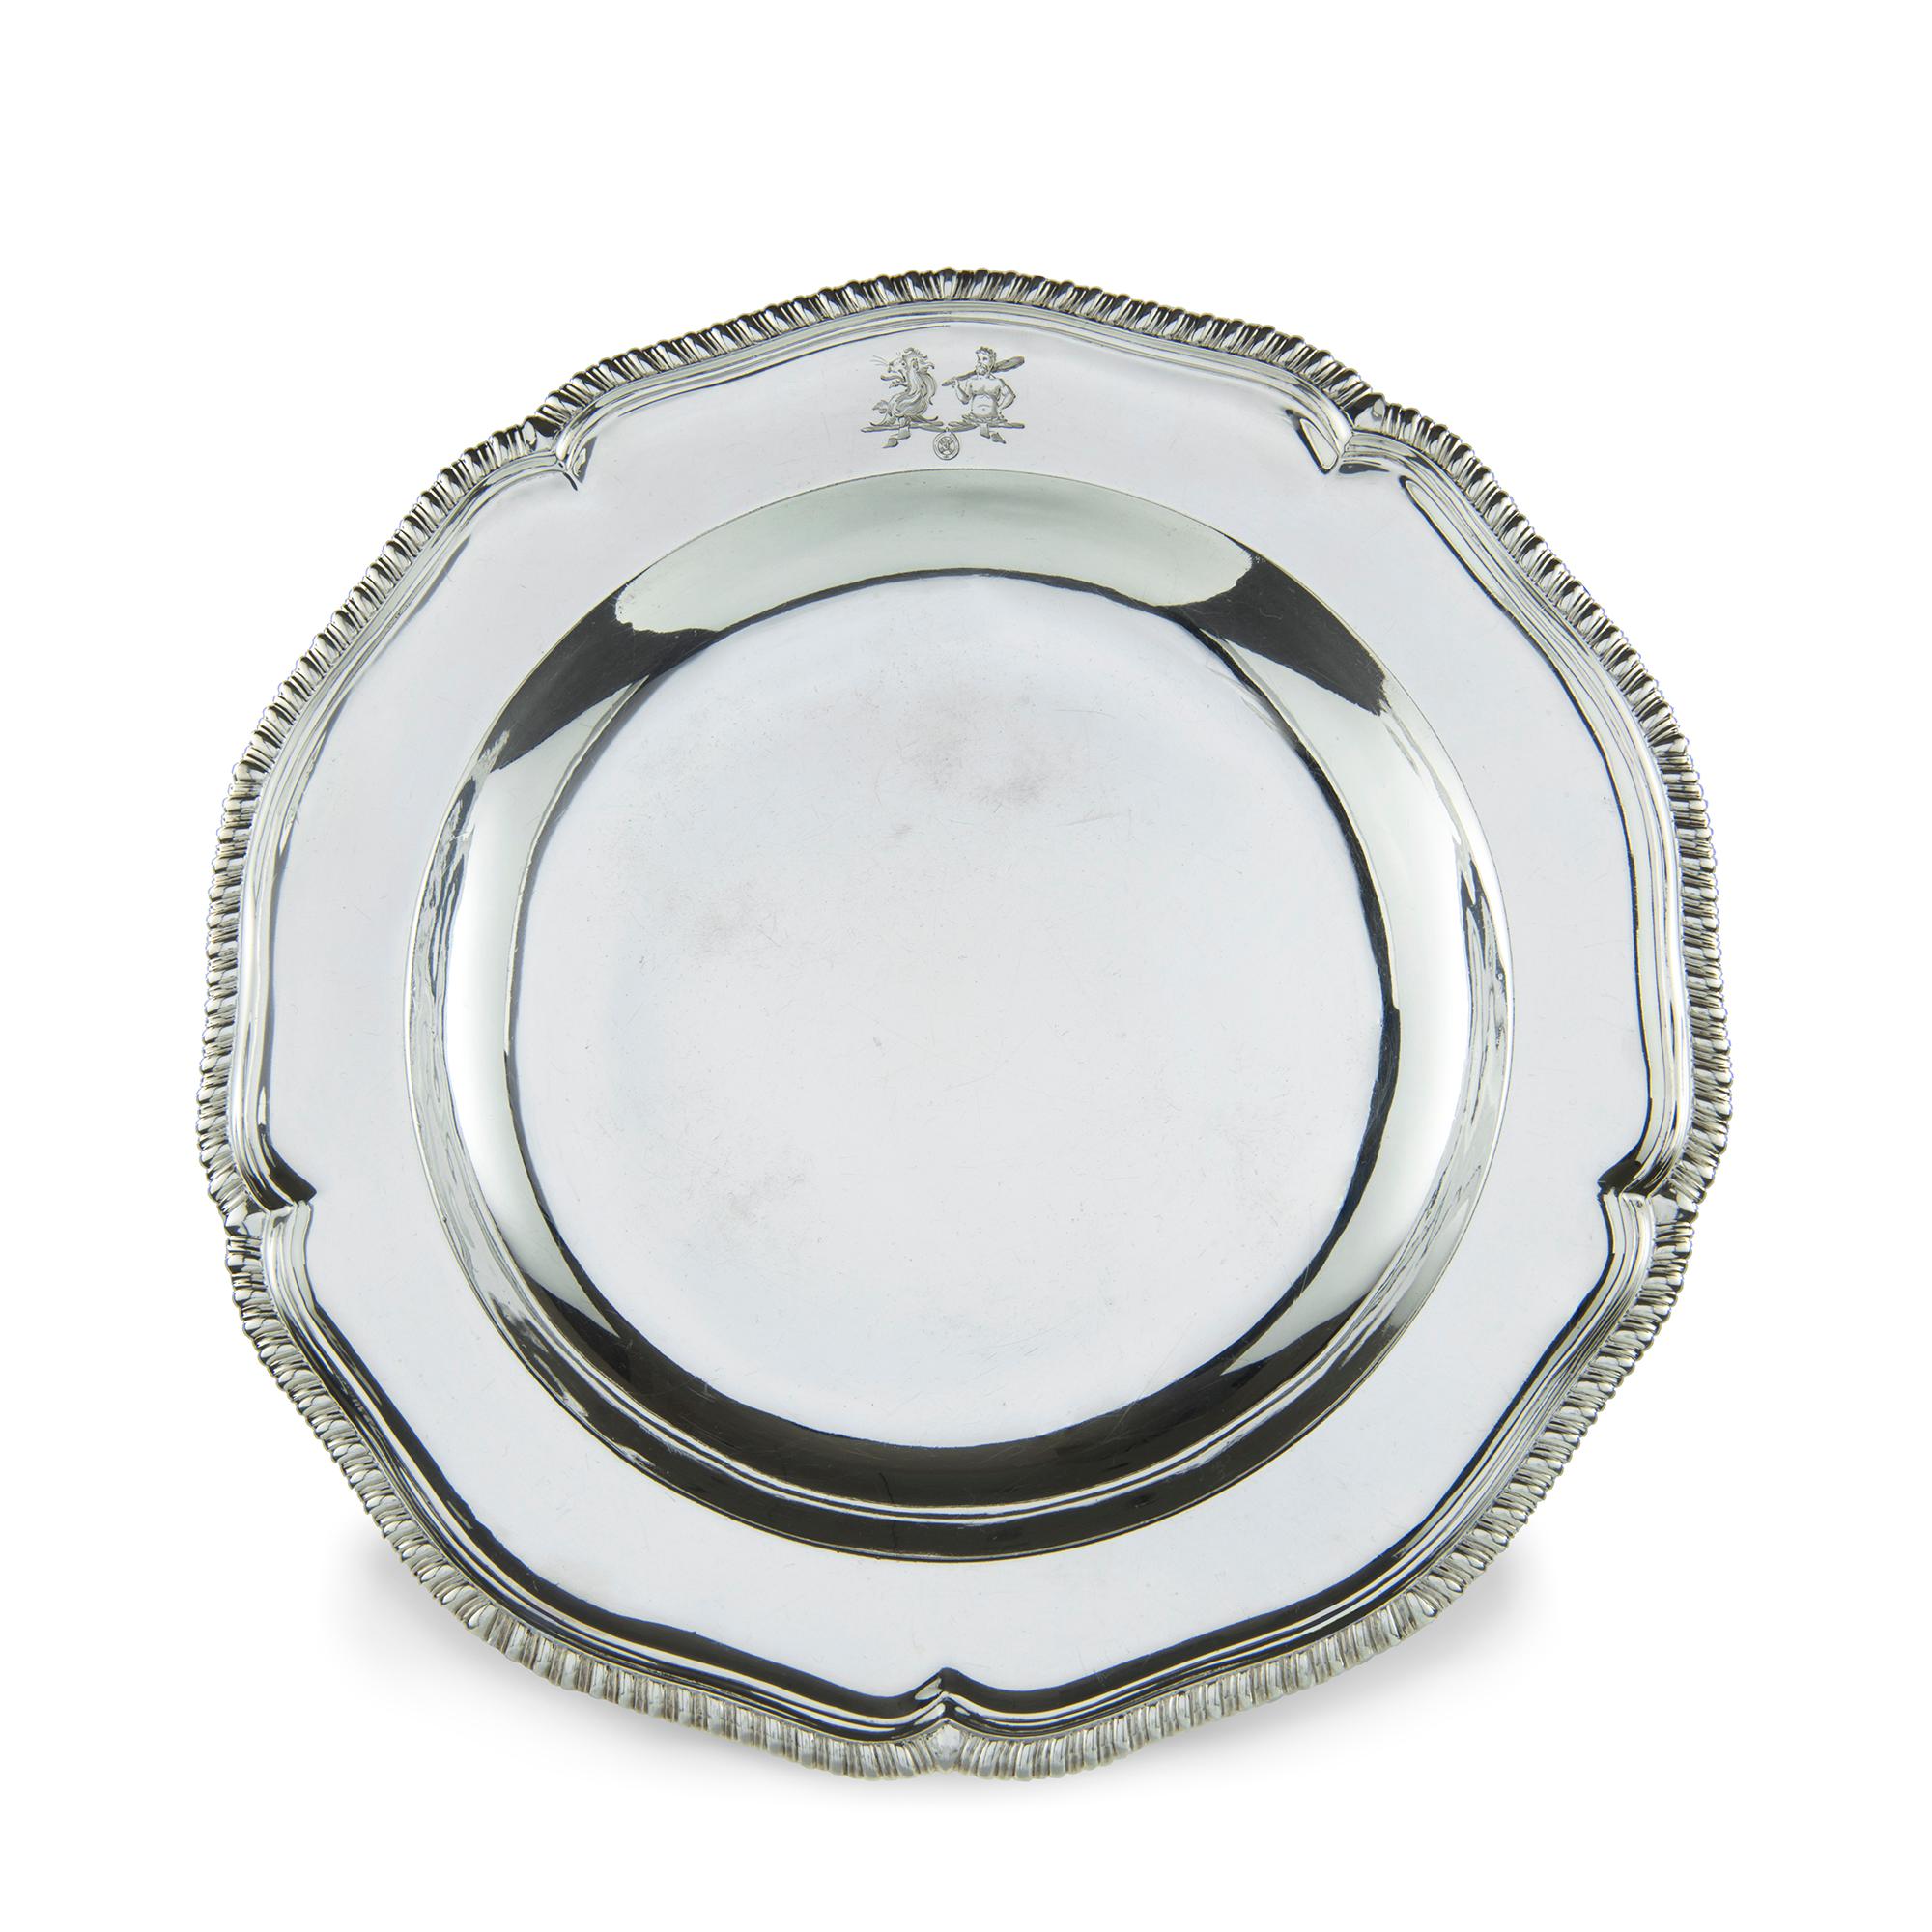 Twelve Georgian sterling silver soup plates, six with the mark of Richard Carter, Daniel Smith, and Robert Sharp, London, 1778, five with the mark of Thomas Hemming, London,1 774, one with the mark of Sebastian and James Crespell, London,1759.
Each